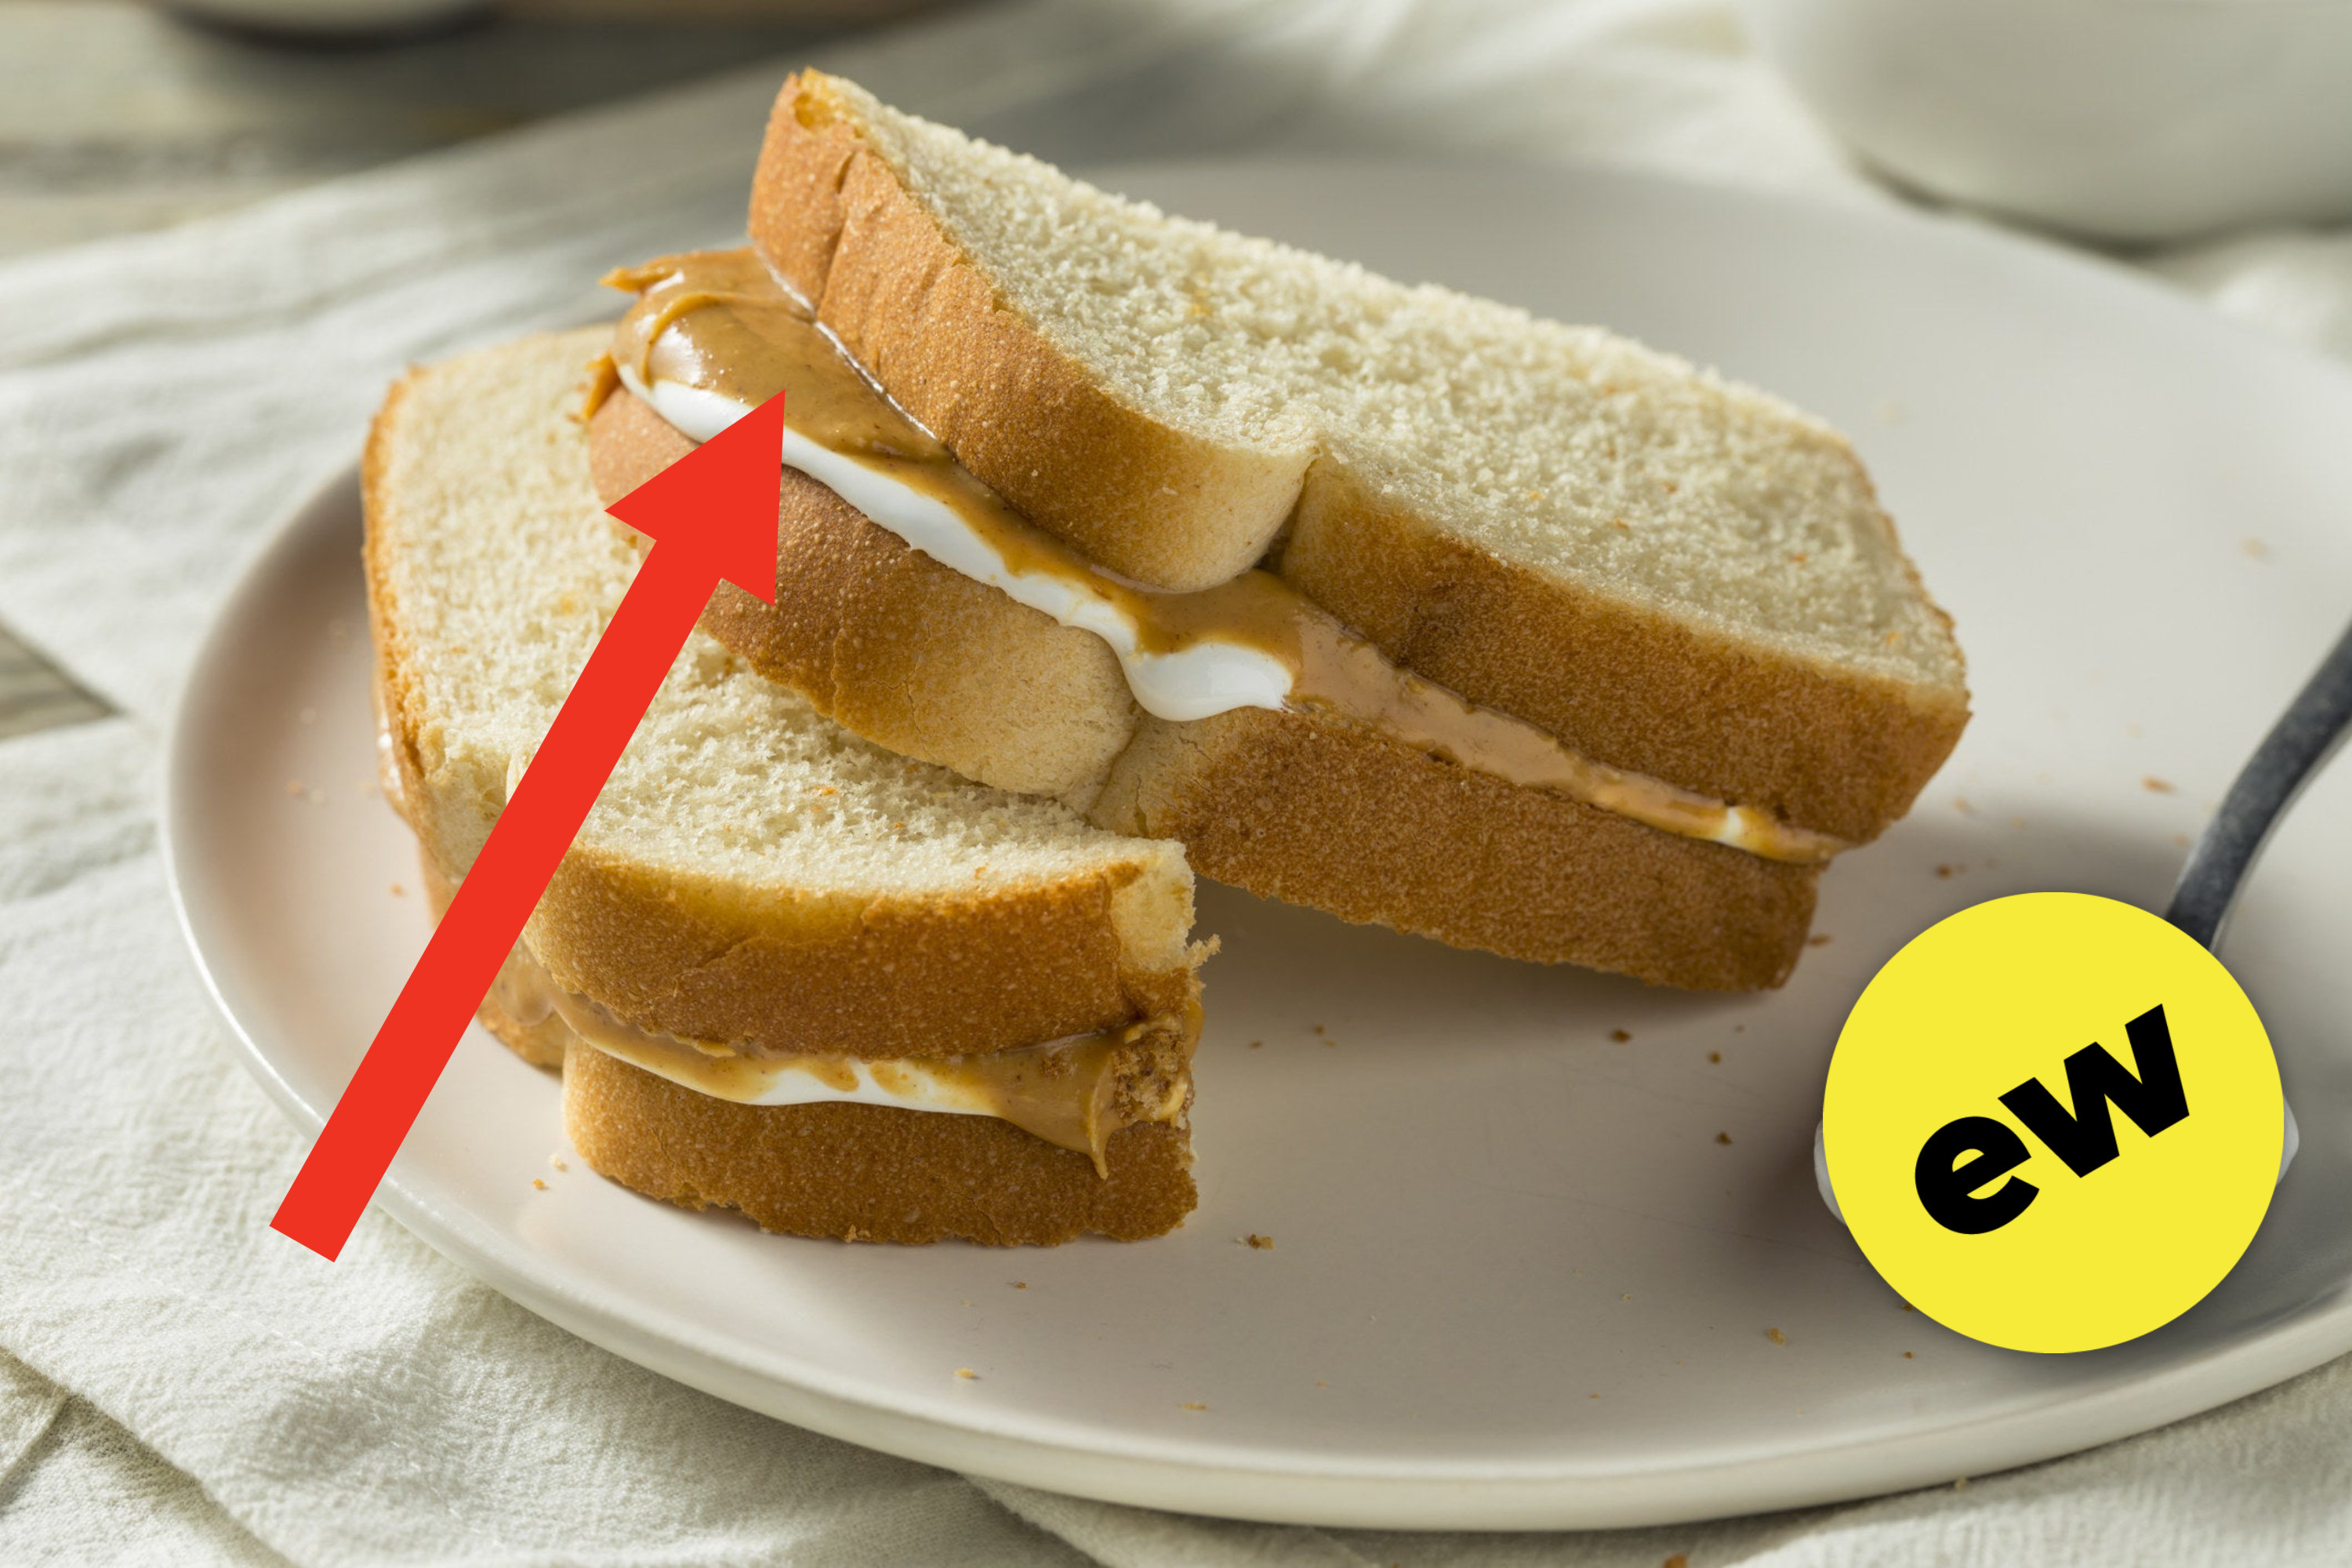 A peanut butter and mayo sandwich.